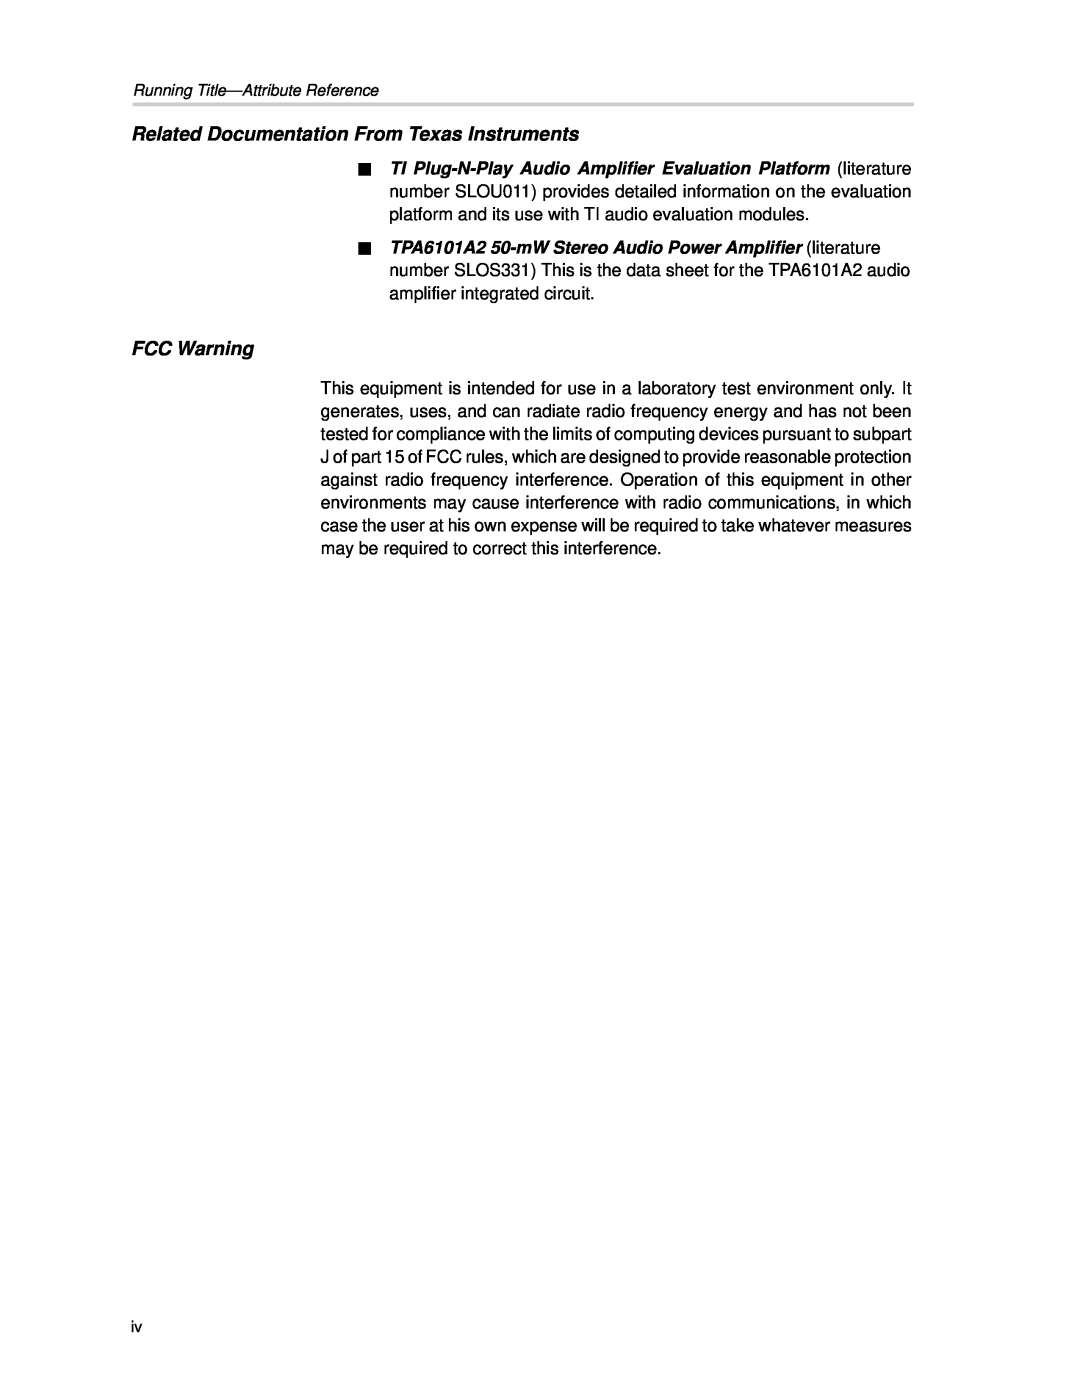 Texas Instruments TPA6101A2 Related Documentation FromJTexas Instruments, FCC Warning, Running Title-AttributeReference 